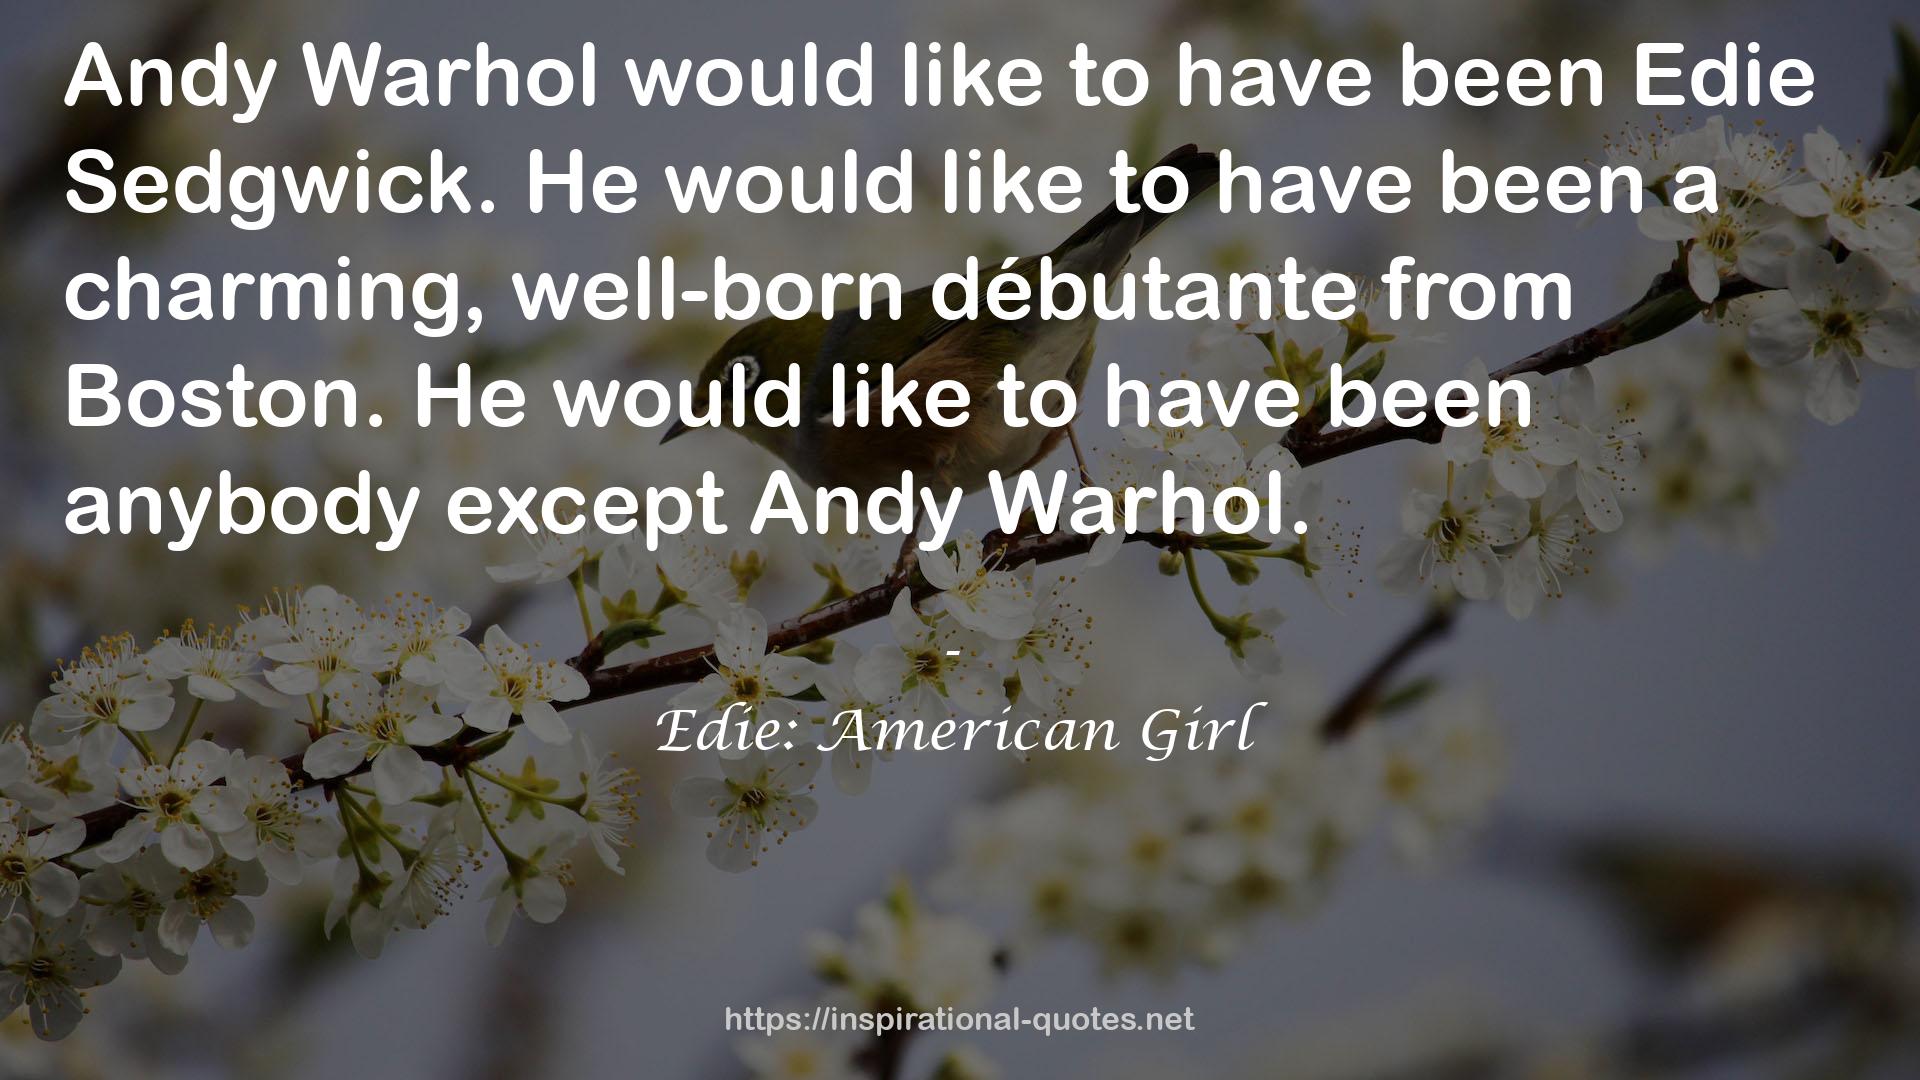 Edie: American Girl QUOTES